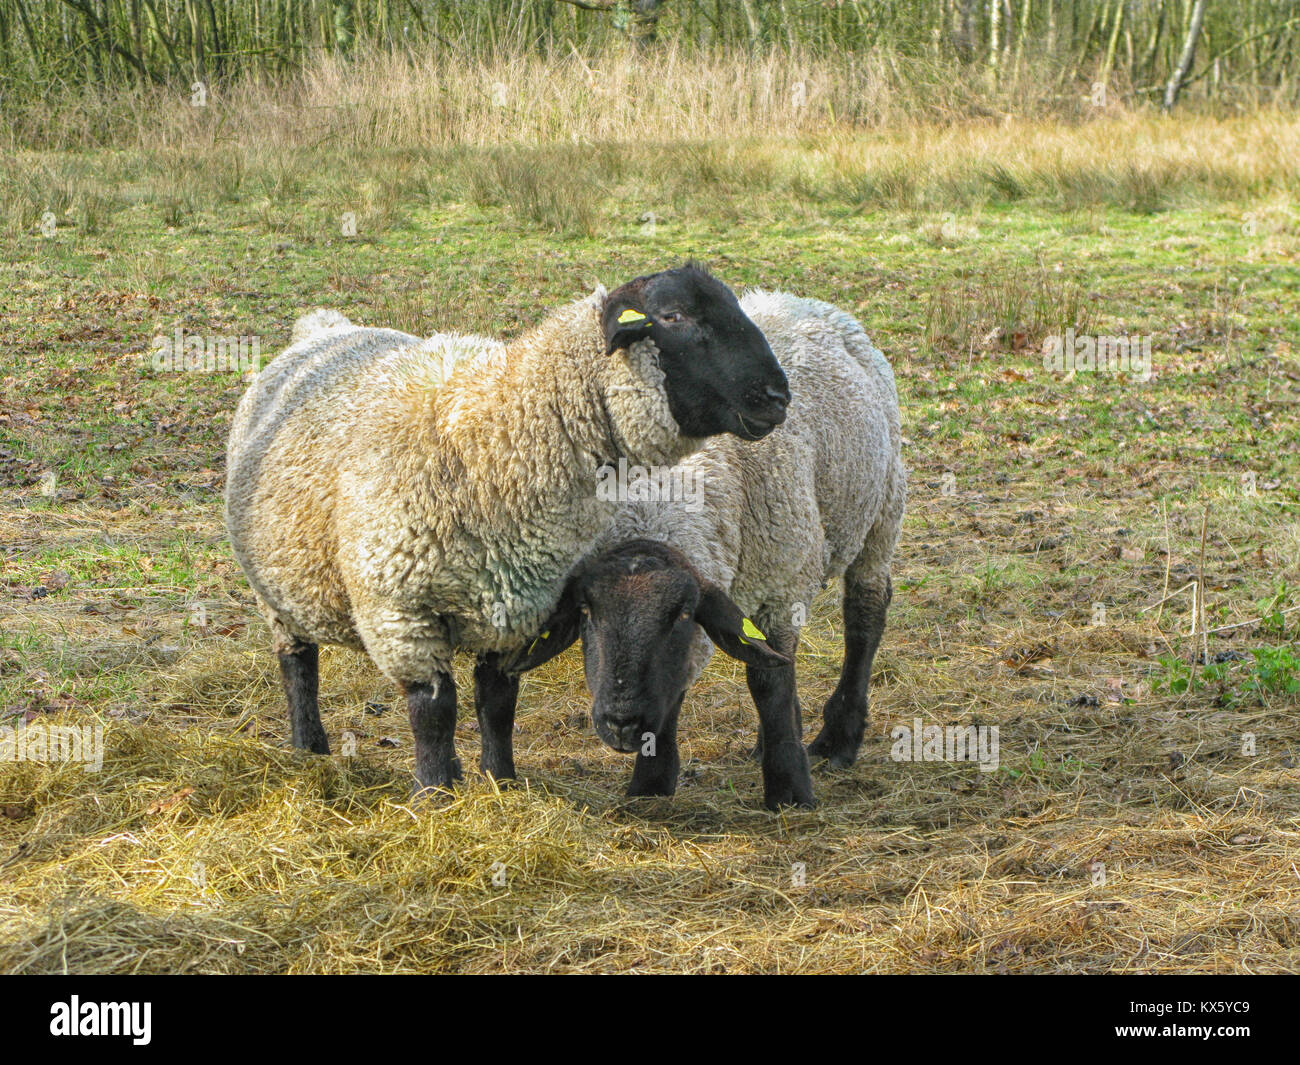 Two inquisitive suffolk sheep on grass Stock Photo